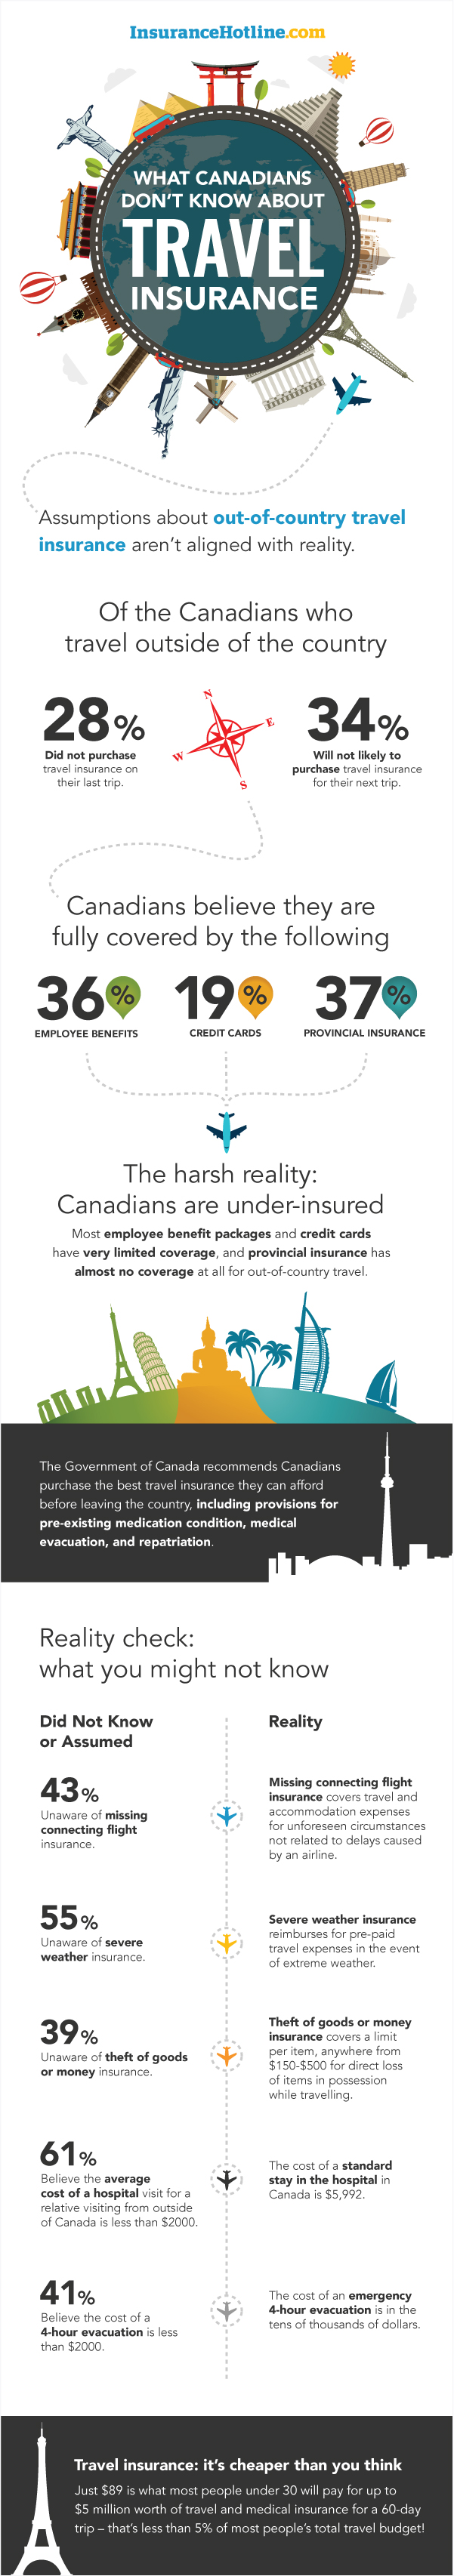 Most Canadians leave their families exposed when it comes to travel insurance, national survey reveals